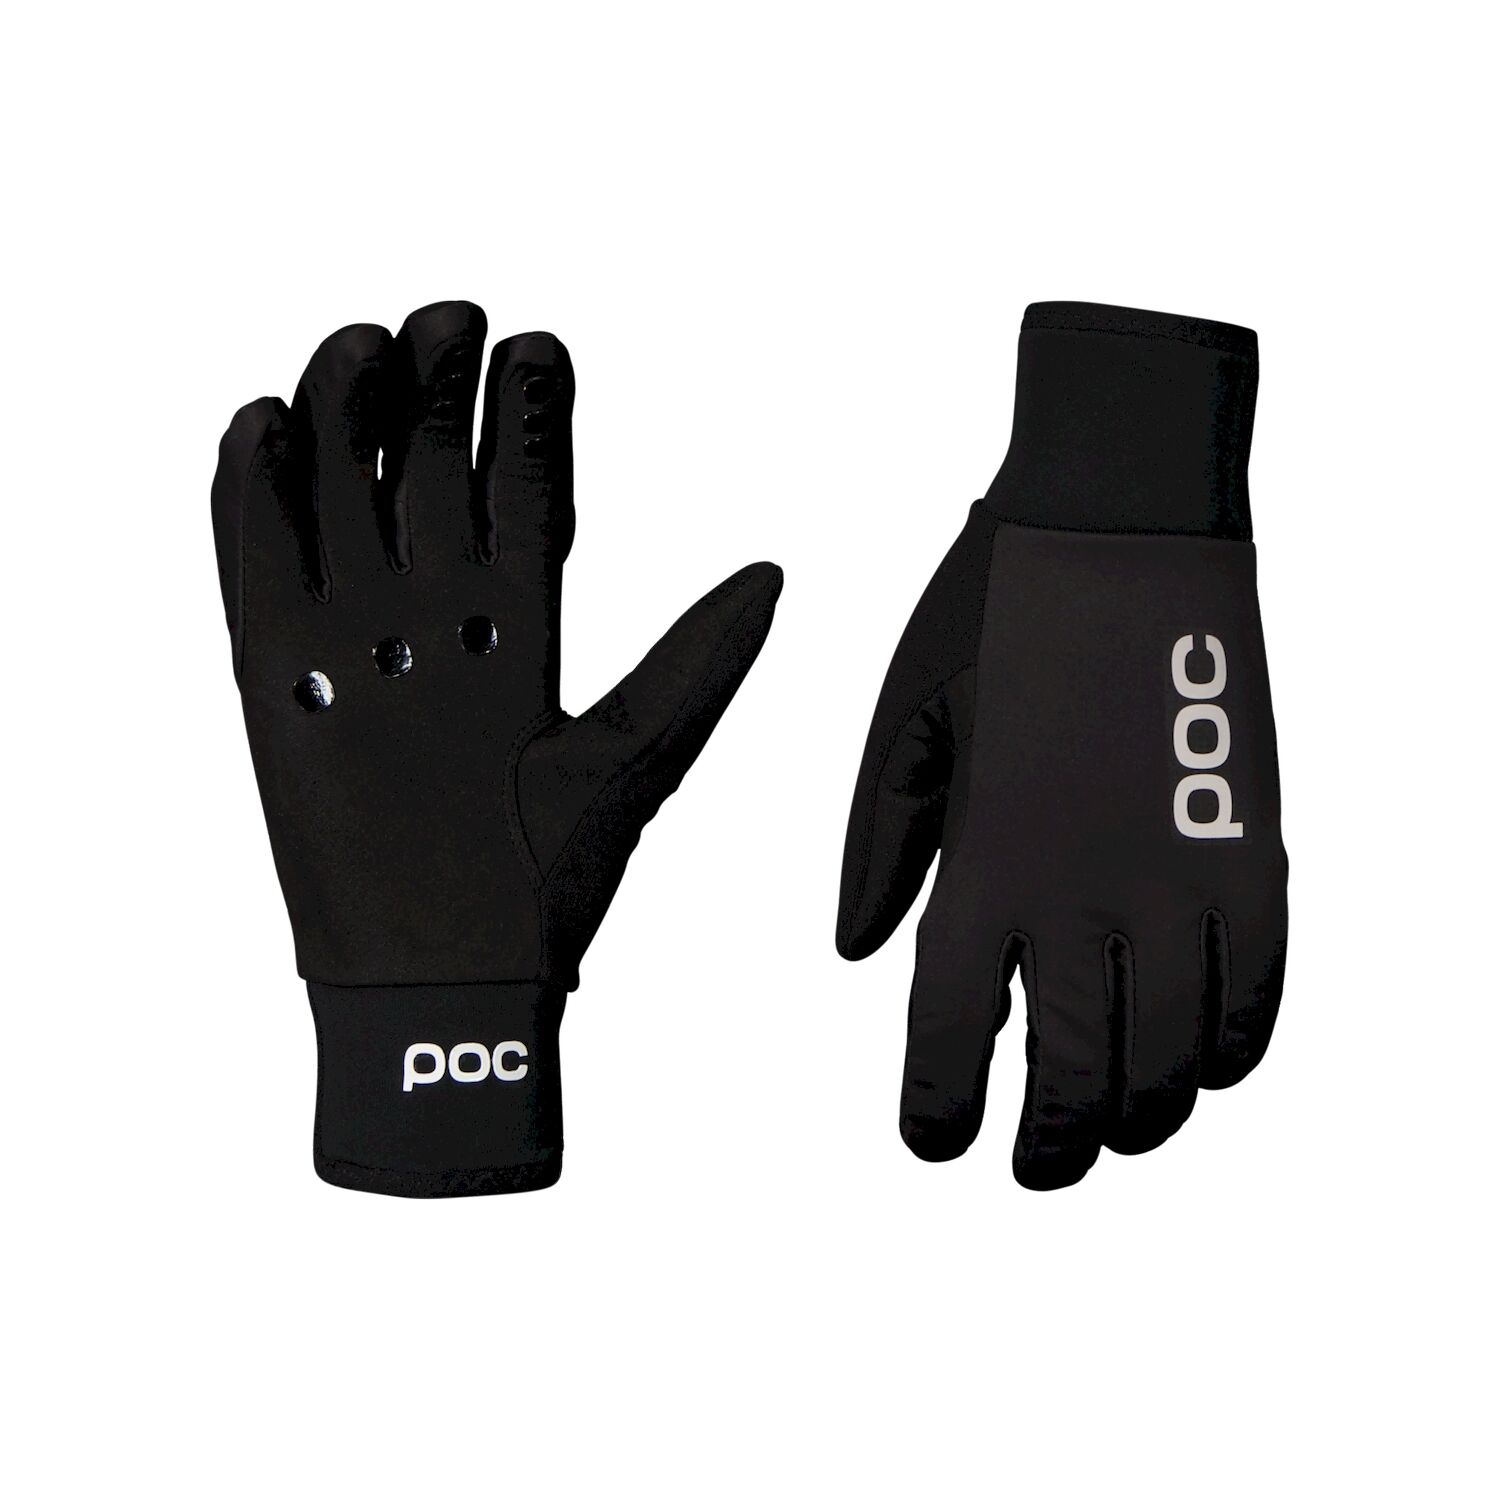 Poc Thermal Lite Glove - Cycling gloves